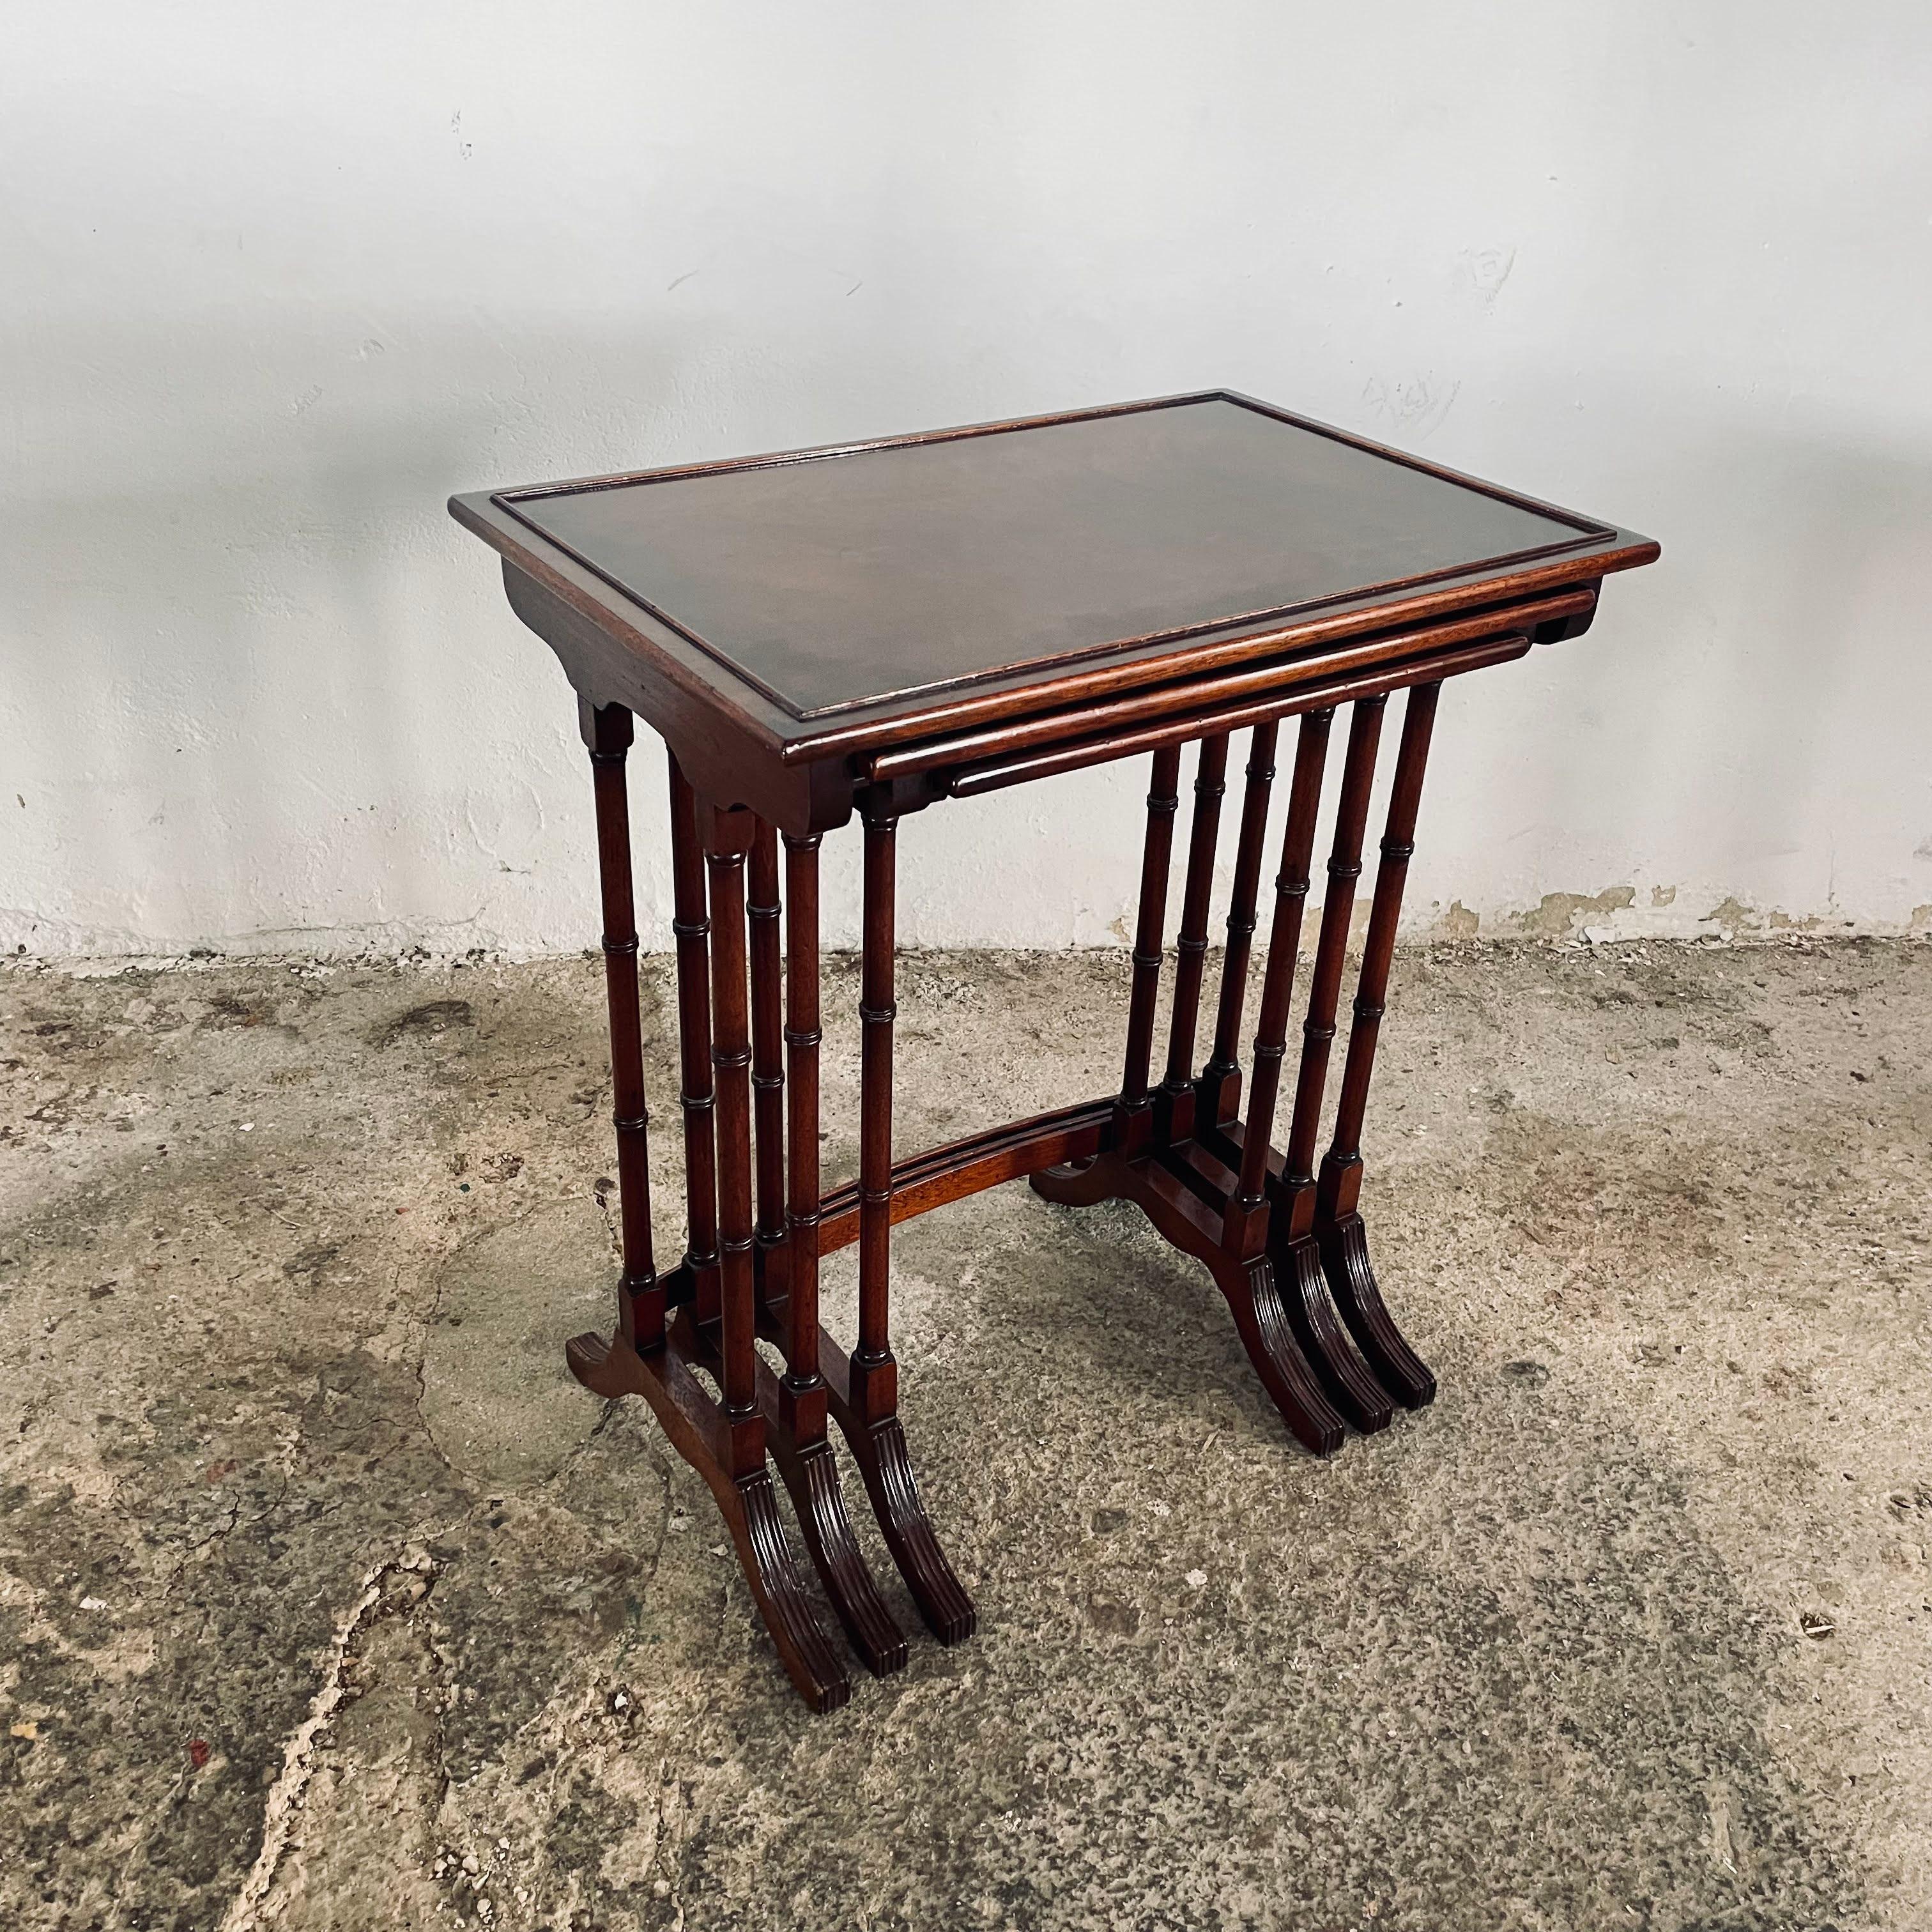 Fine set of 3 English vintage nesting tables by Titchmarsh & Goodwin in Mahogany wood finish custom made, this mahogany nest of tables has finely turned legs and splay feet. The tops have a small inset beading with crossbanding, excellent condition